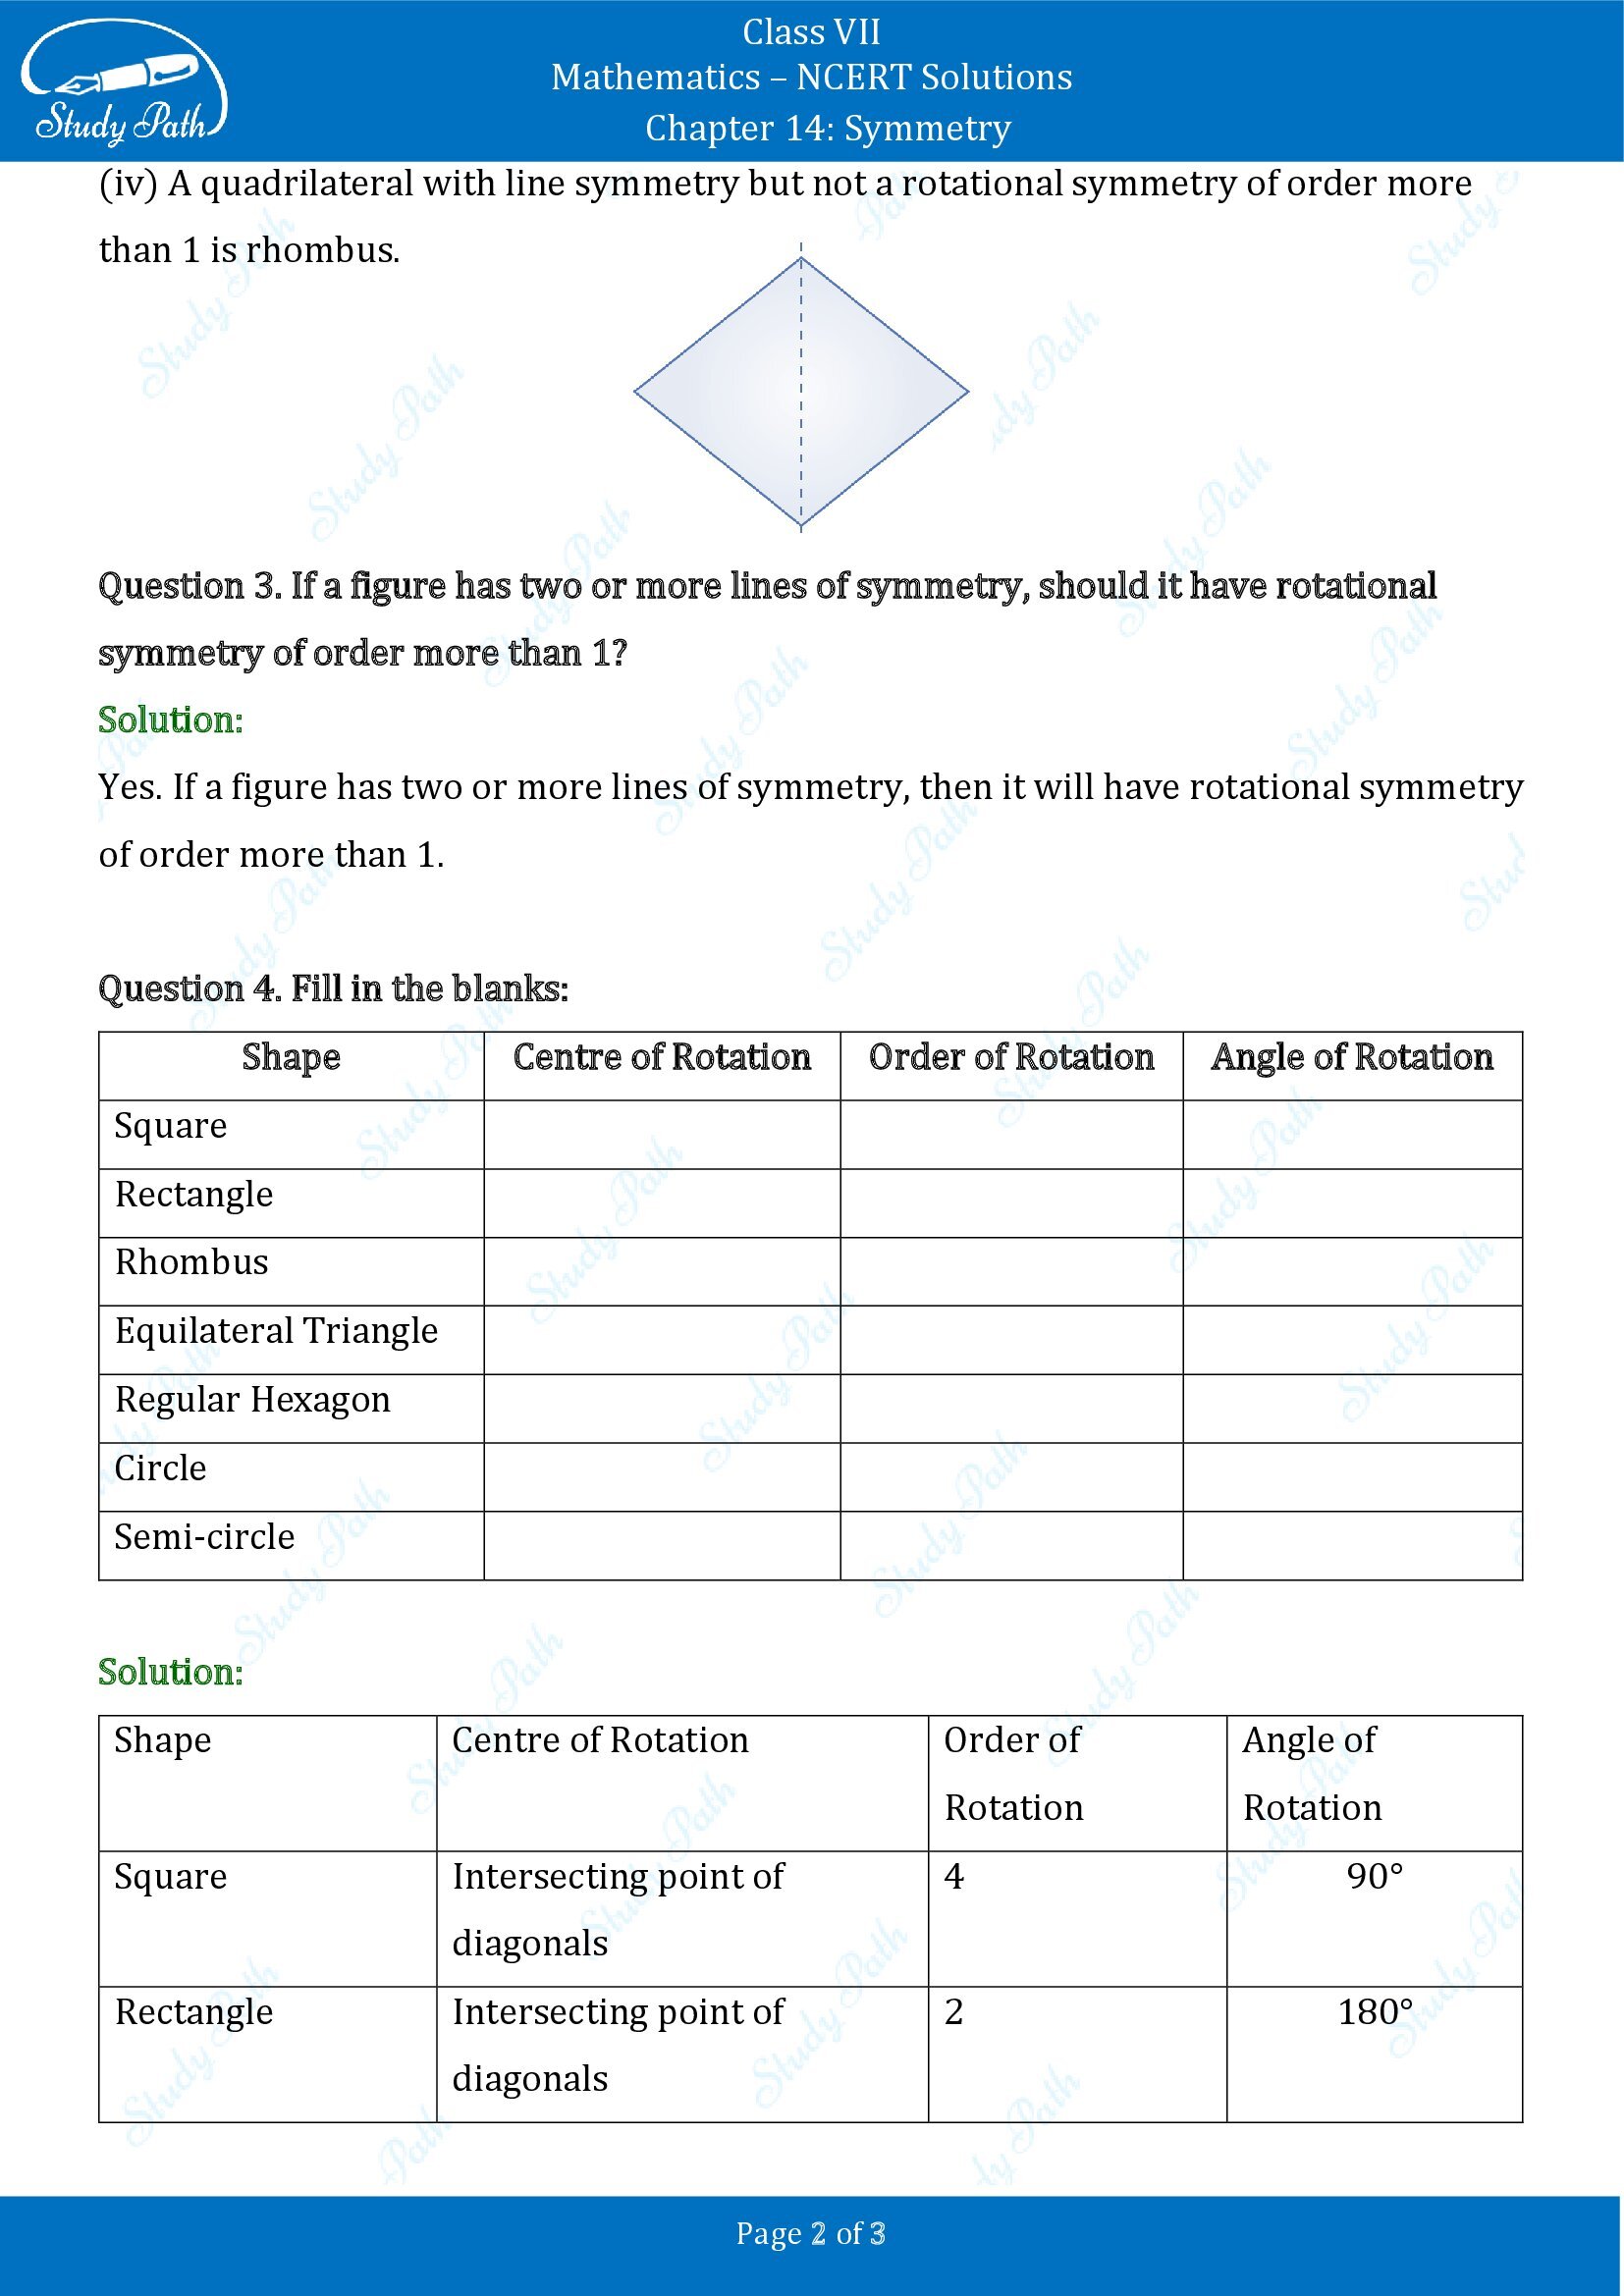 NCERT Solutions for Class 7 Maths Chapter 14 Symmetry Exercise 14.3 00002